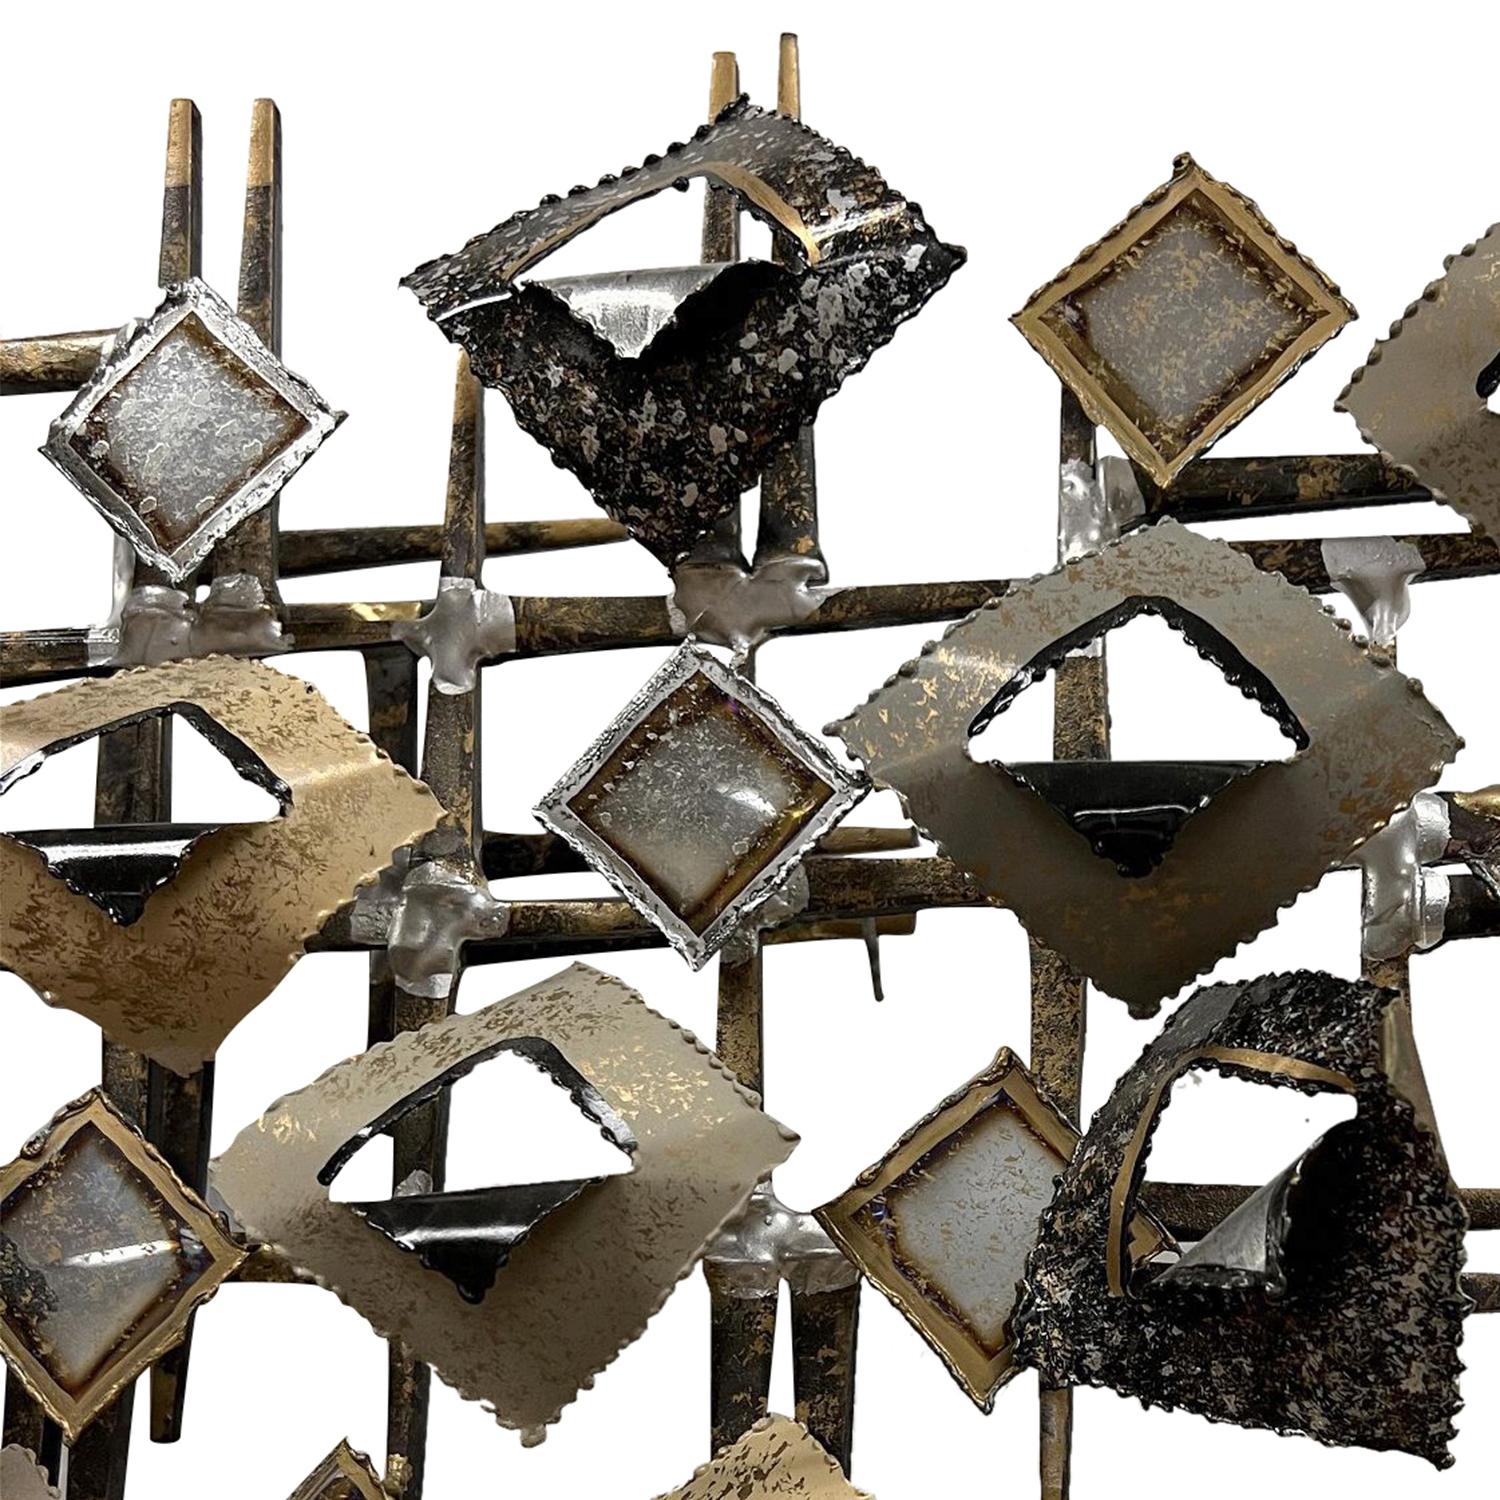 Gilt 20th Century American Abstract Brutalist Metal Wall Sculpture by Linda Casetti For Sale